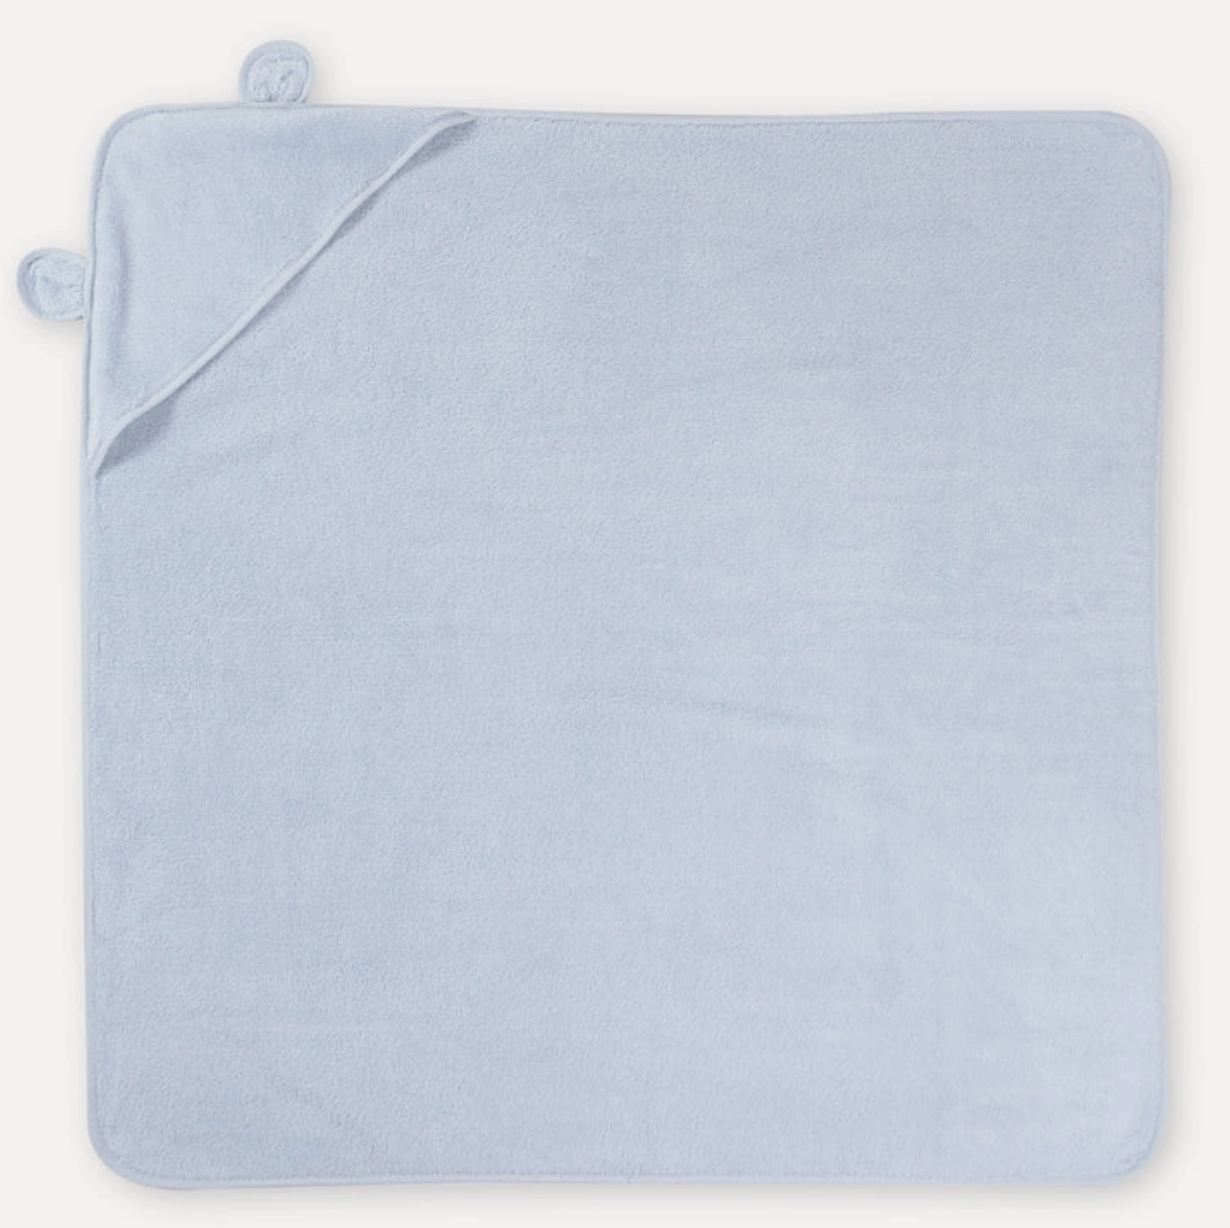 Organic Cotton Hooded Towel For Babies and Toddlers - Blue